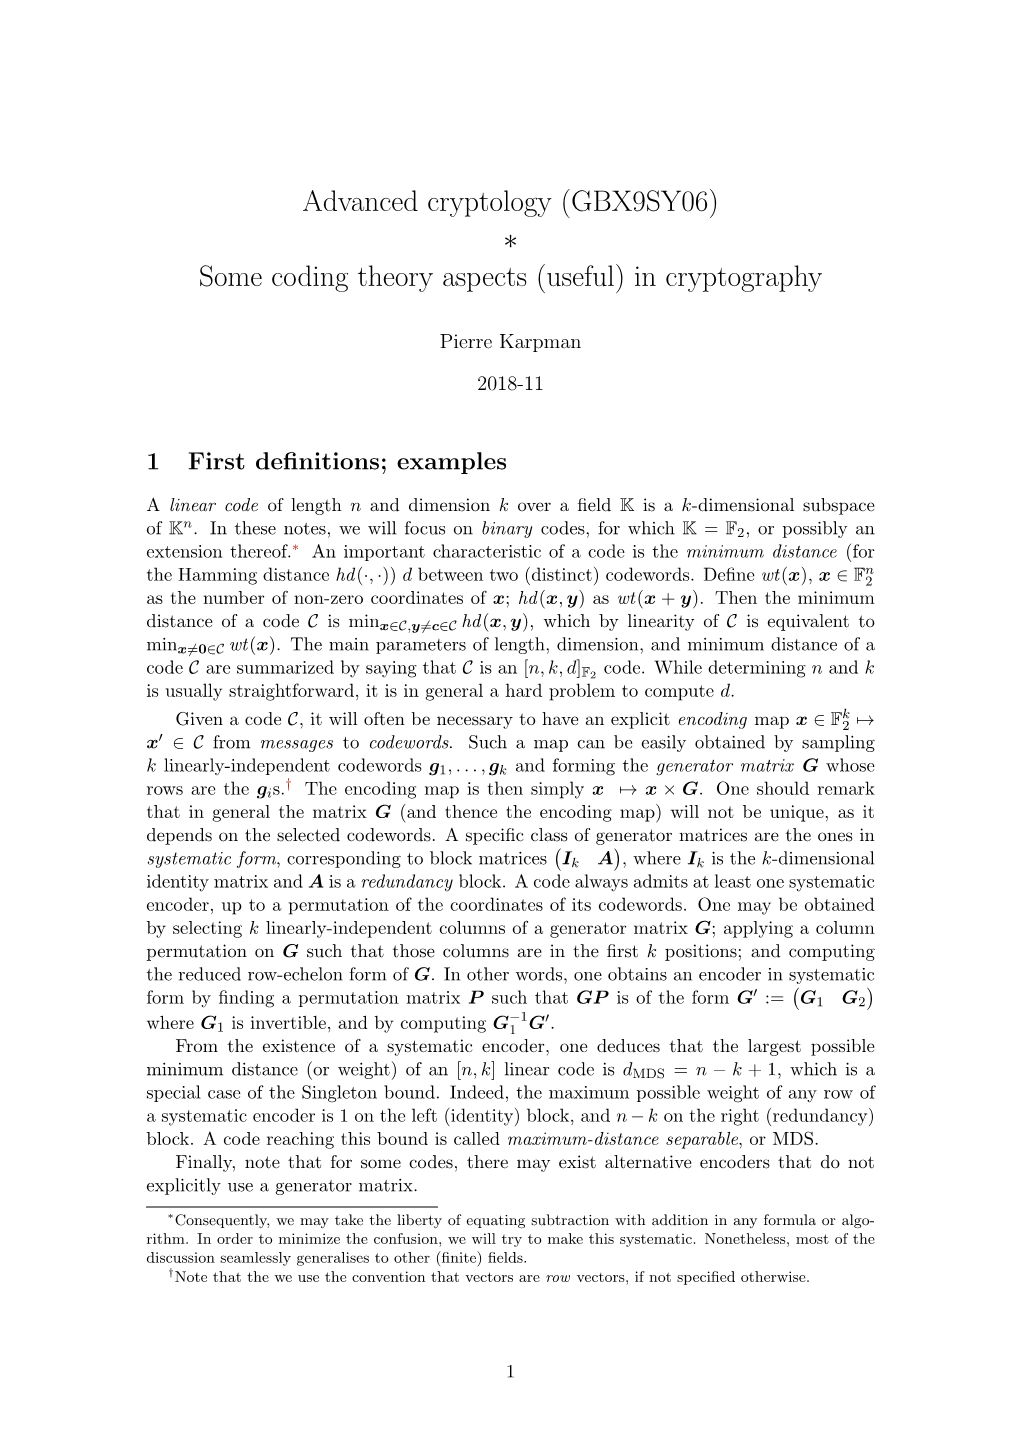 Advanced Cryptology (GBX9SY06) ∗ Some Coding Theory Aspects (Useful) in Cryptography